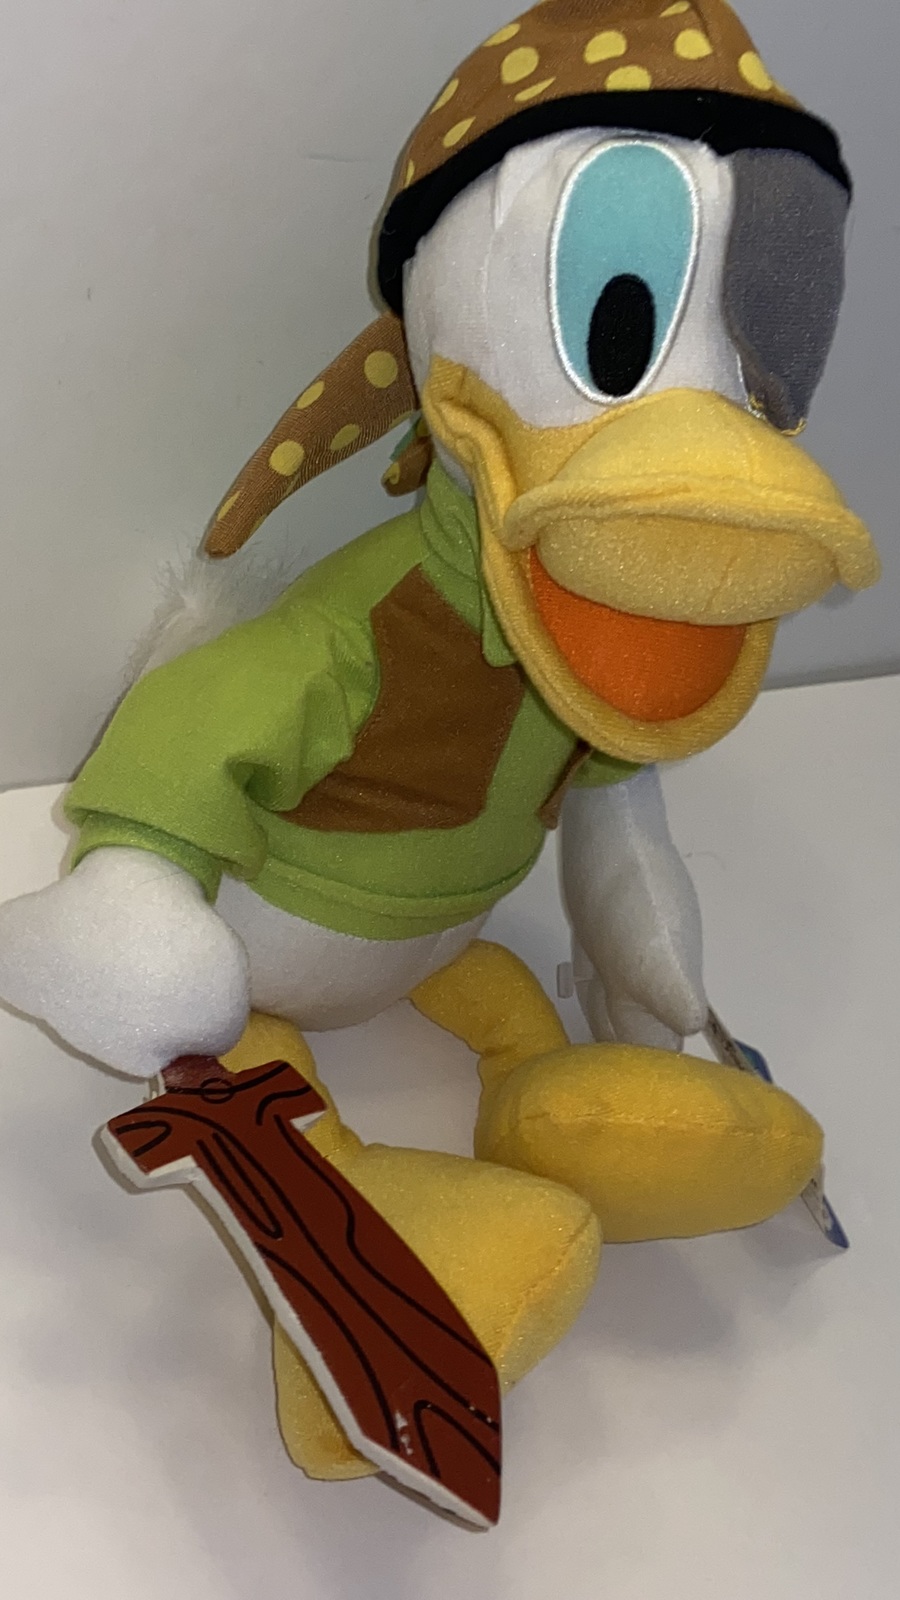 Disney Donald Duck Plush Pirate Eye Patch Sword Toy Factory Tags - $24.99